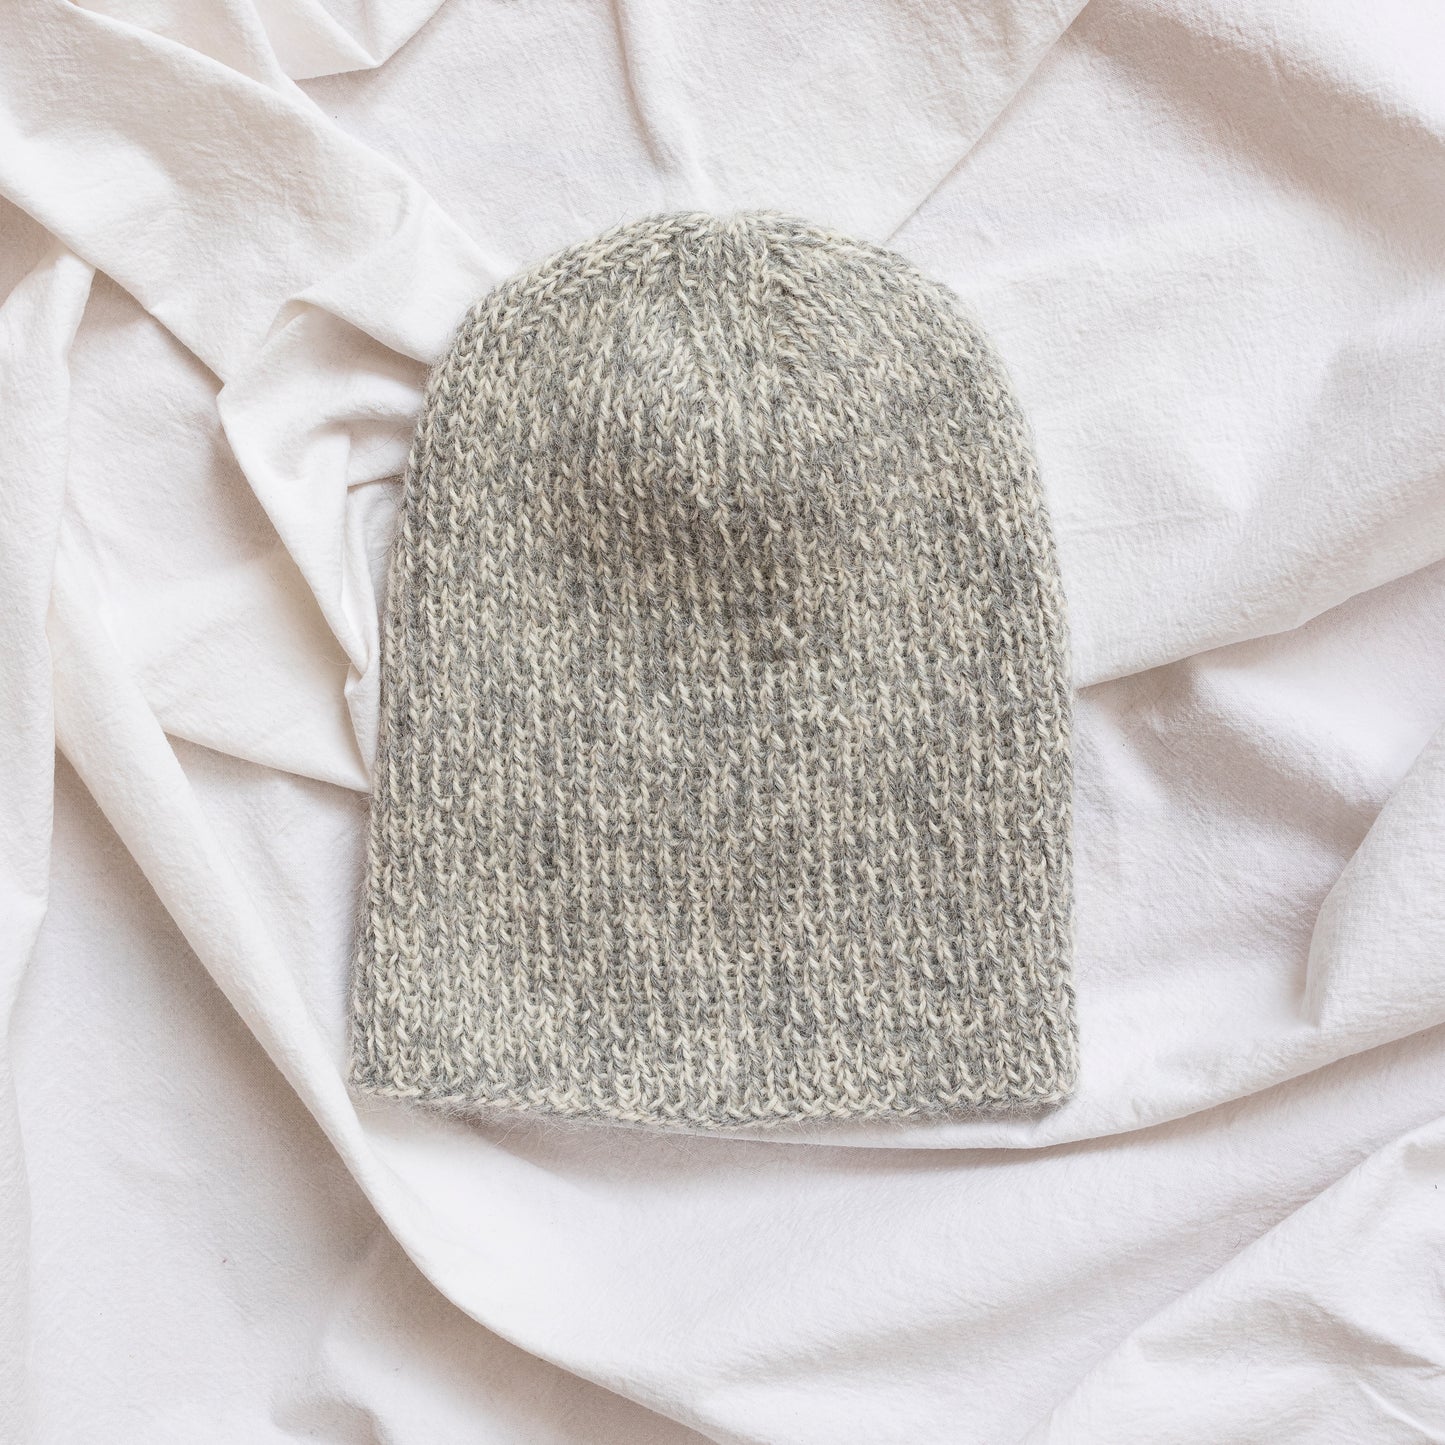  Soft and luxurious alpaca knit fisherman's beanie in color beige. 